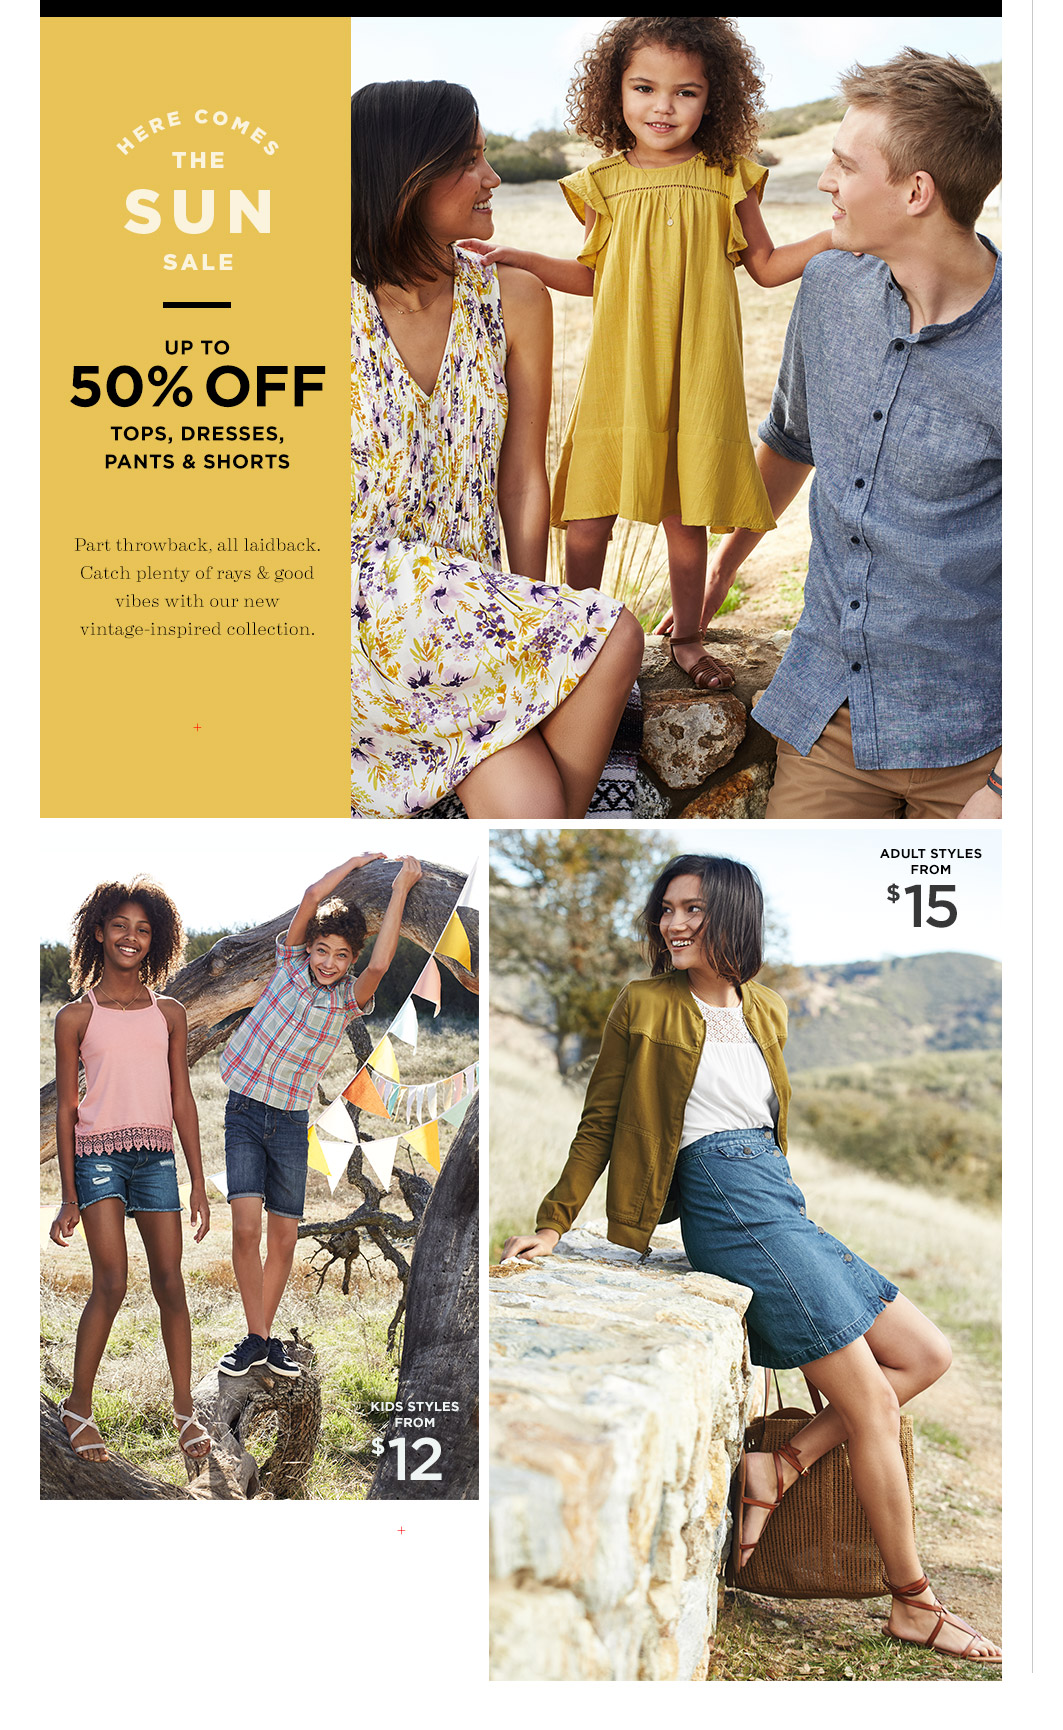 41% Off Any ONE Item at Old Navy + 30% Off Everything Else!